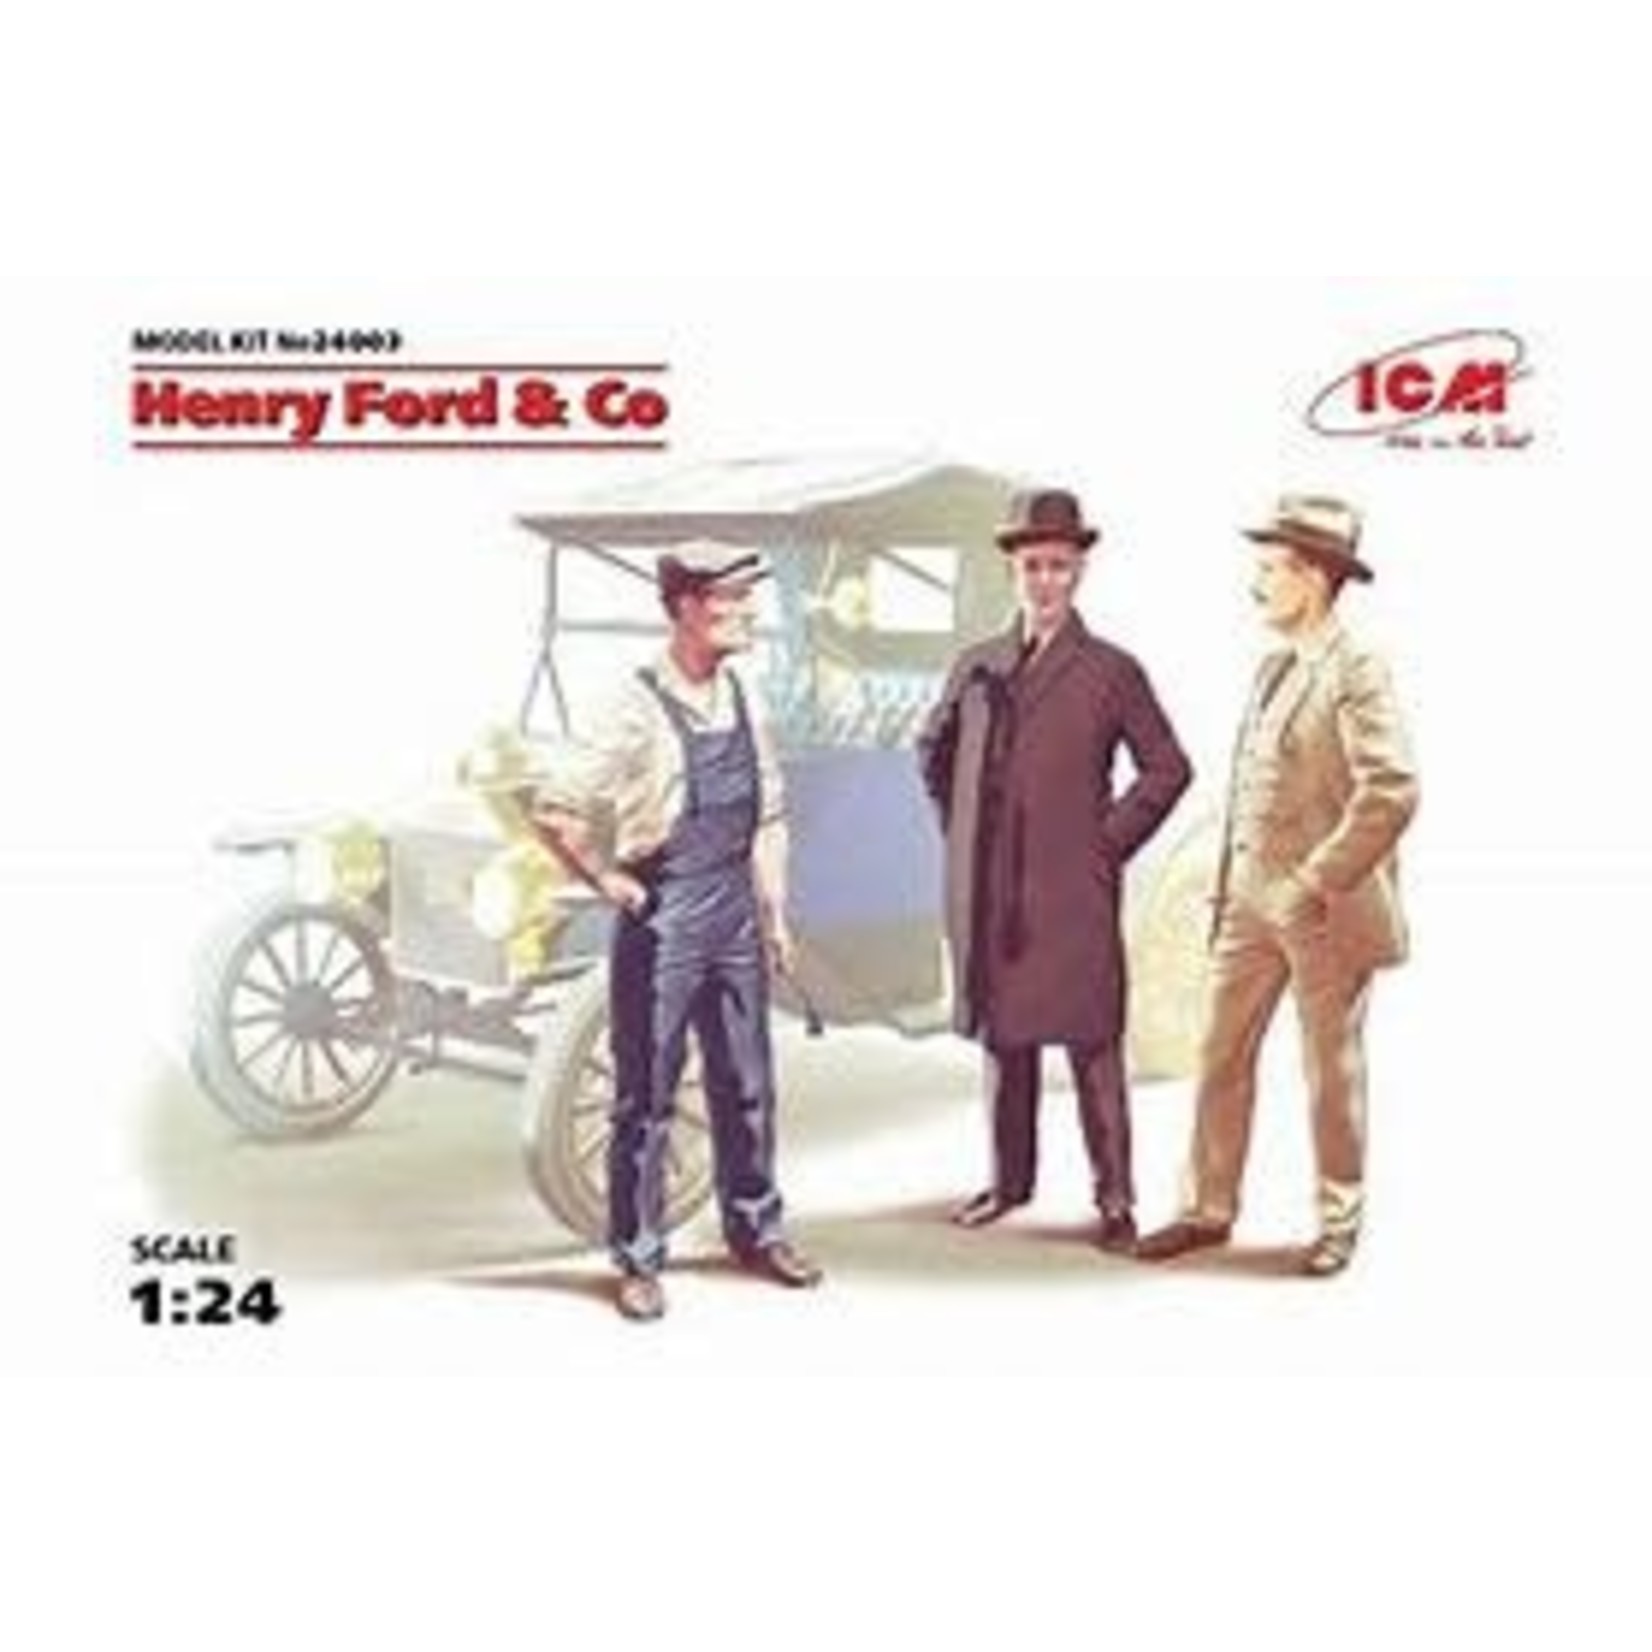 ICM Henry Ford @ Co figures 1/24